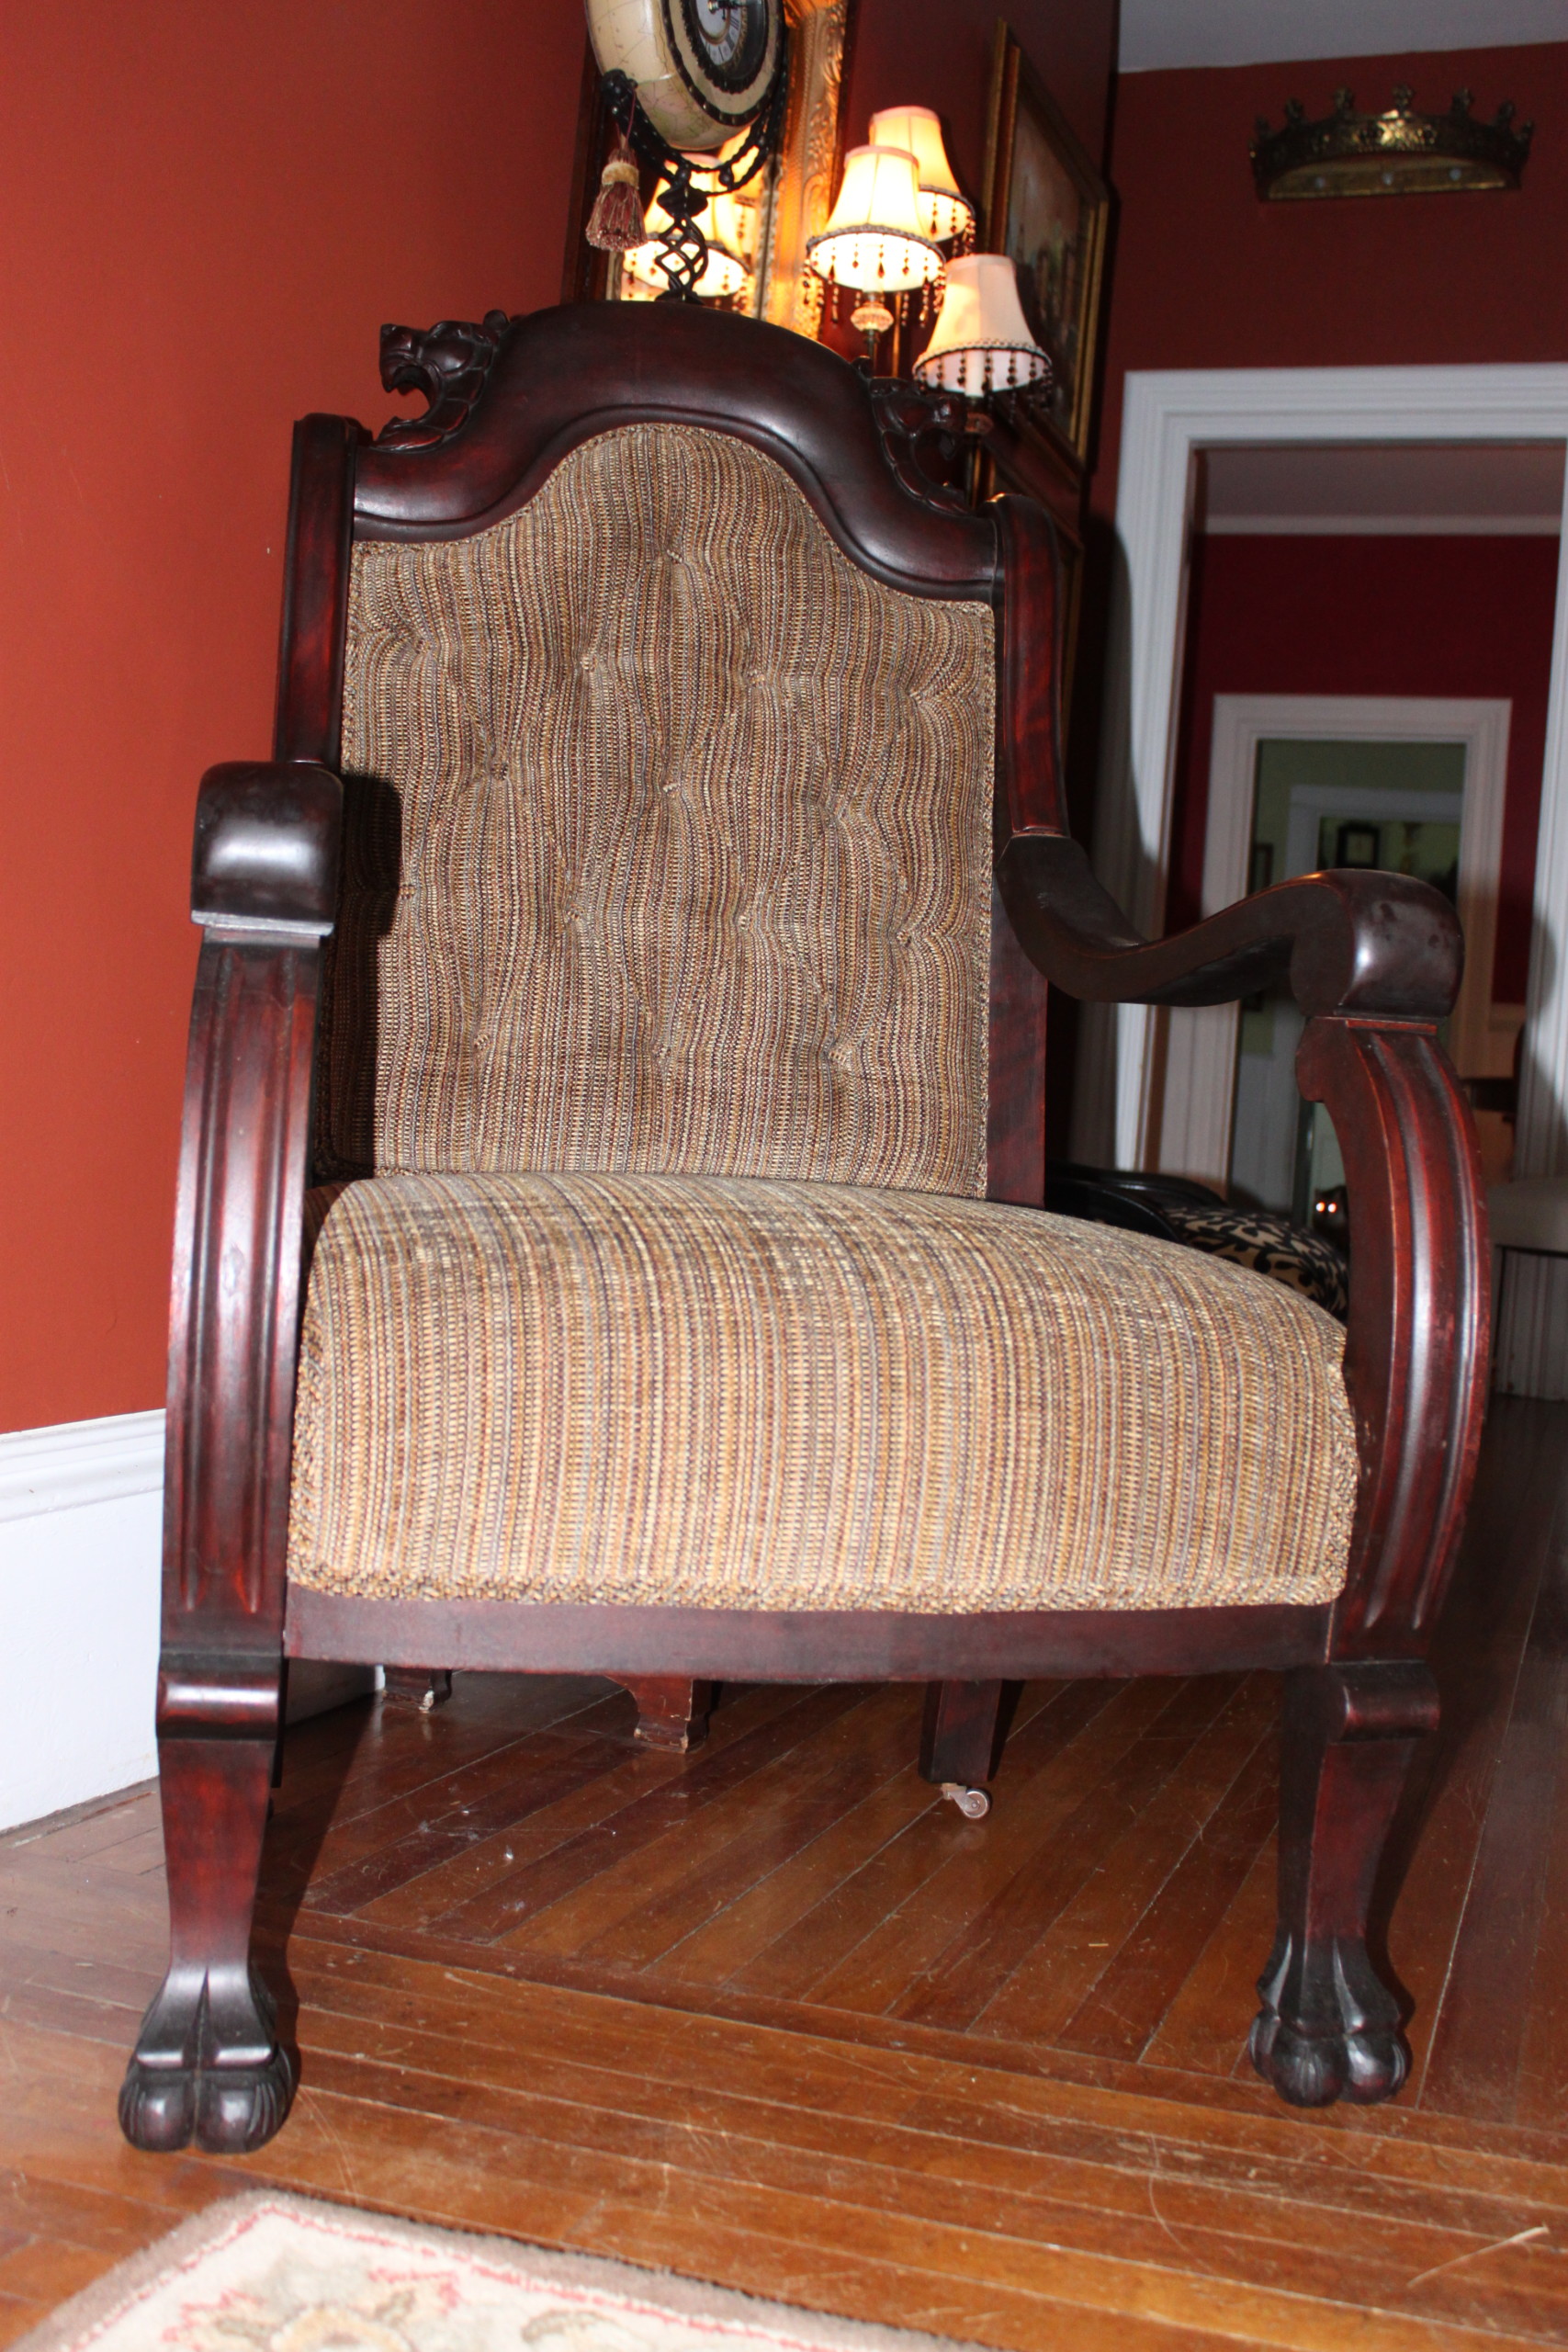 upholstery skills and projects - vintage chair